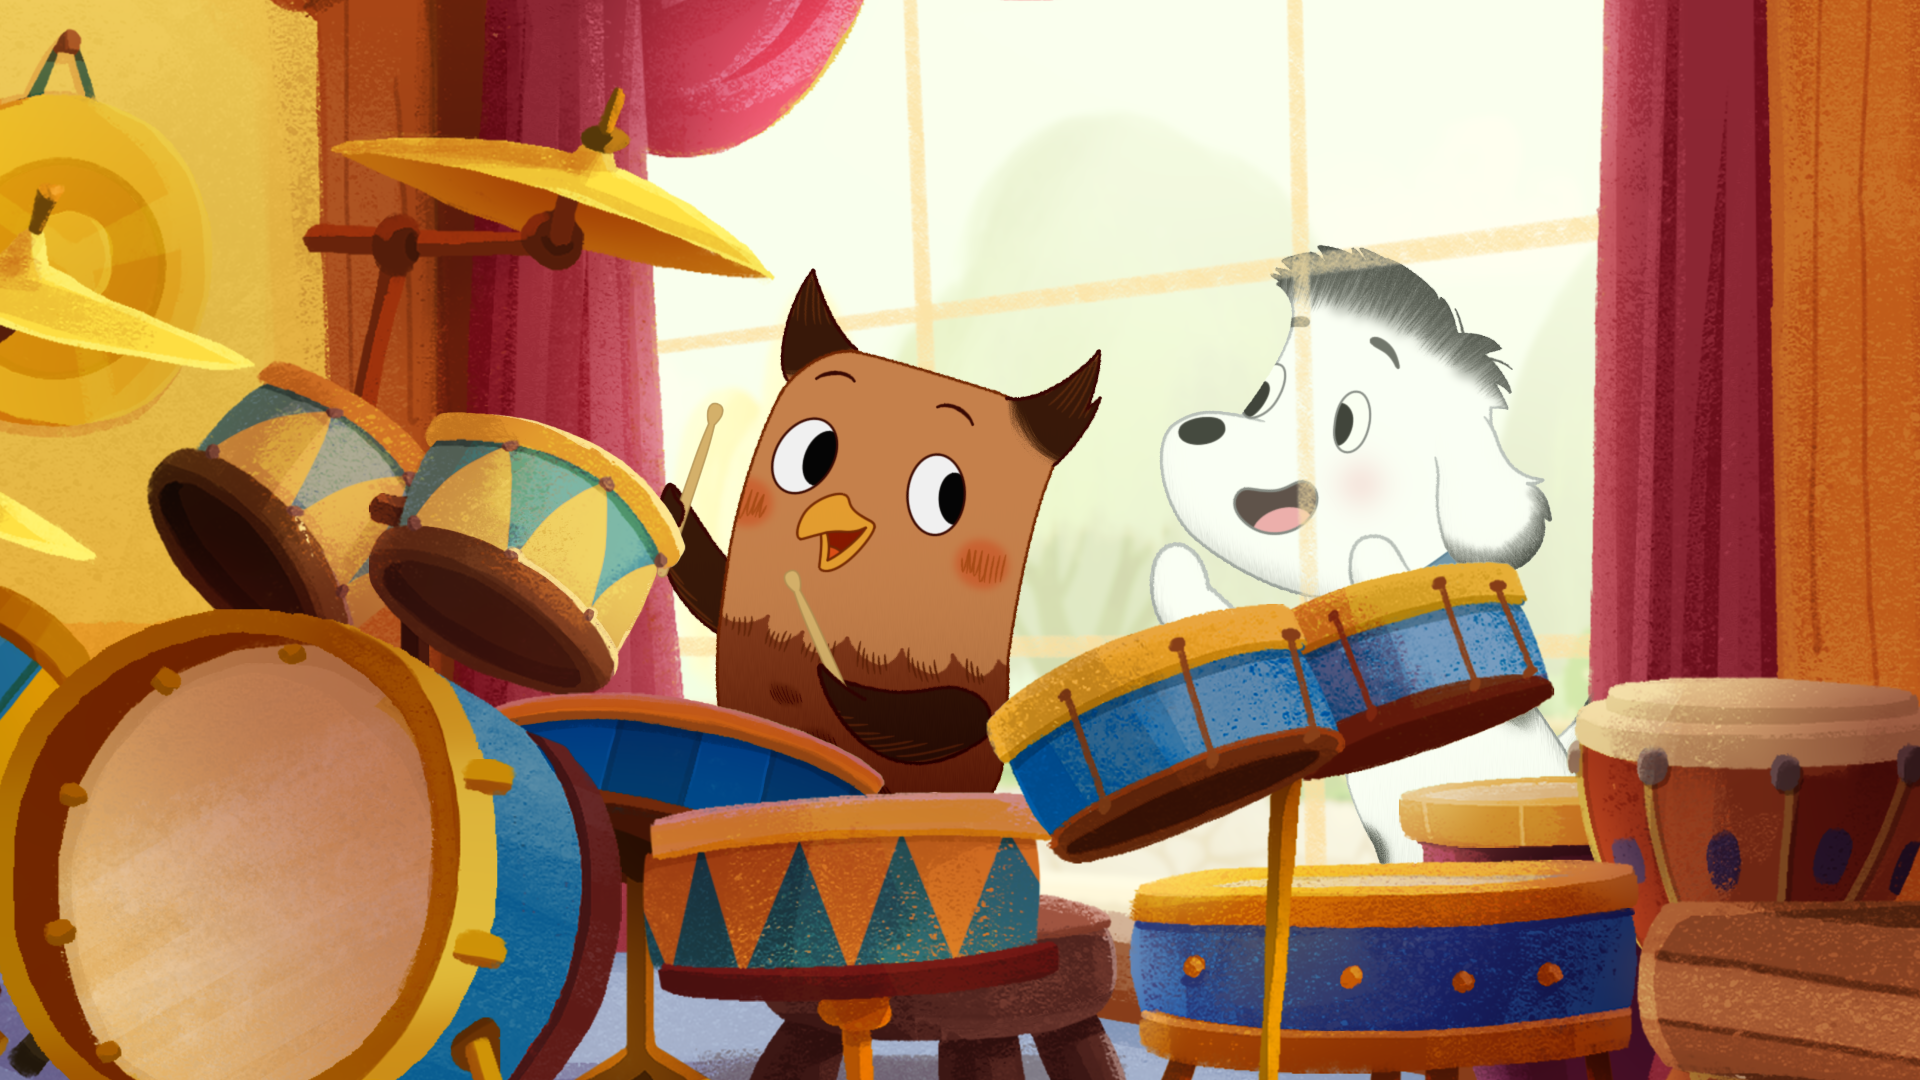 An animated owl plays on a drumset while a white and black dog cheers it on from outside a window.